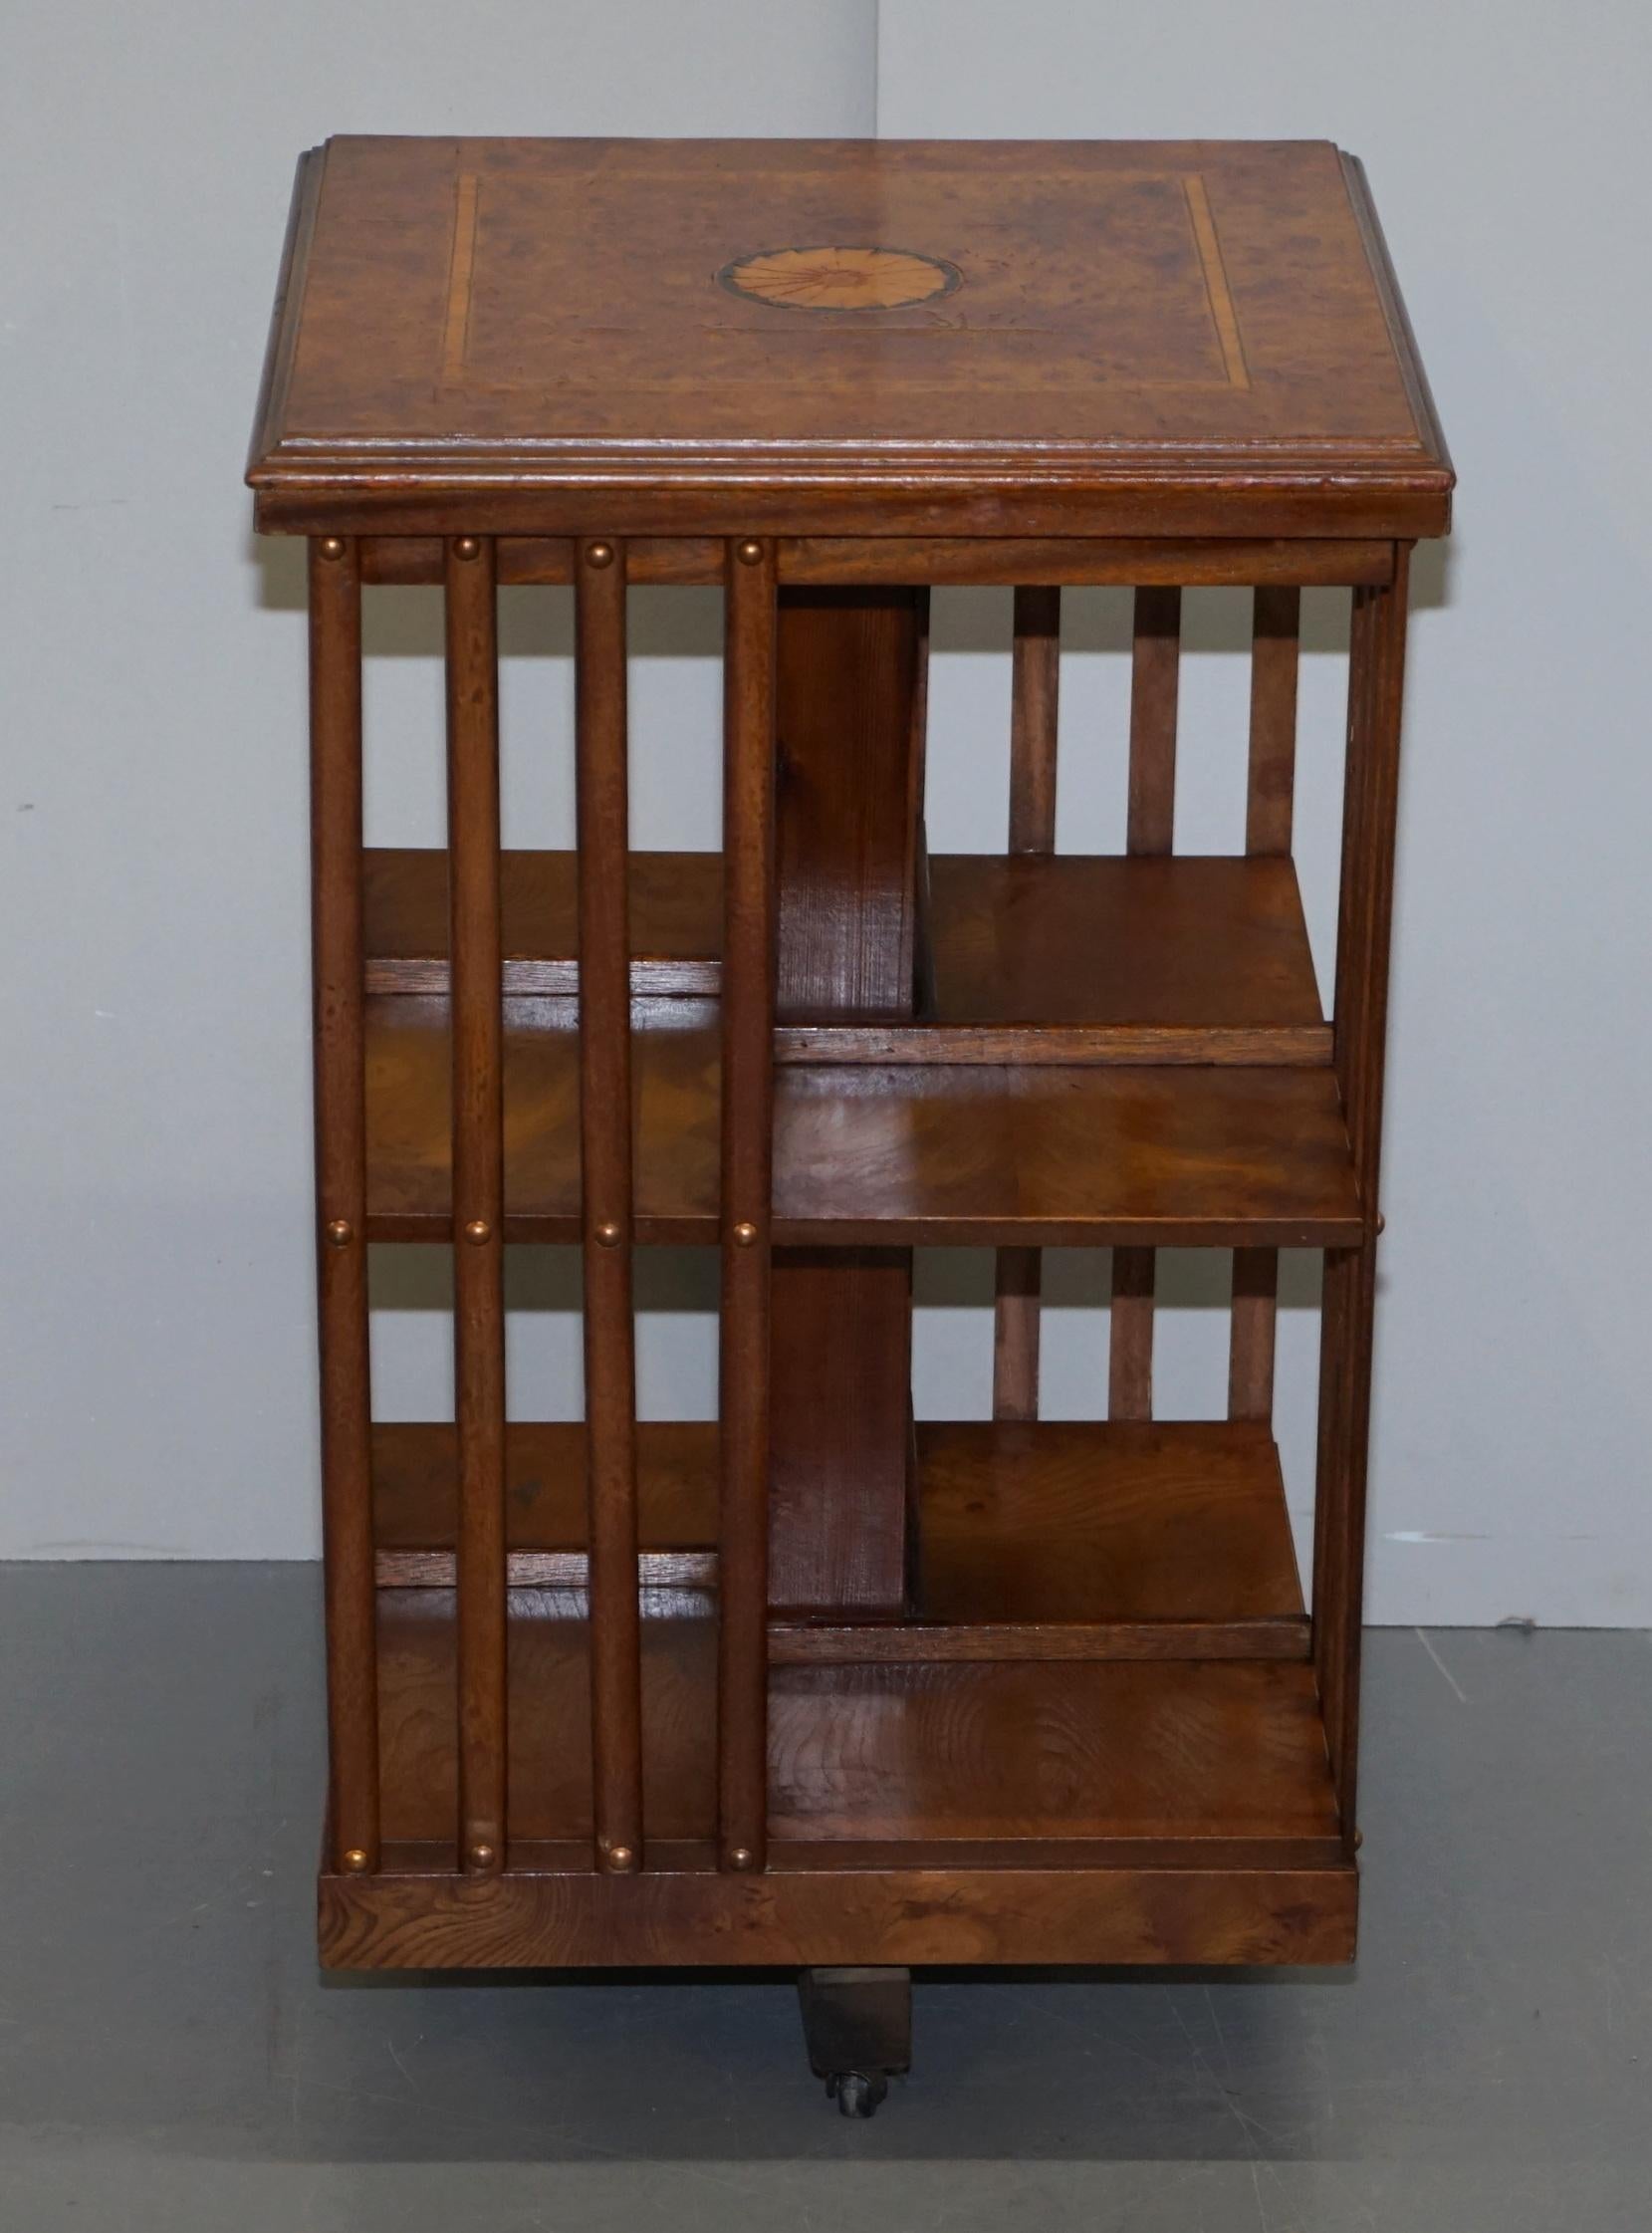 We are delighted to offer for sale this stunning circa 1900 burr walnut revolving bookcases with Sheraton inlaid to the top

An exceptionally well made and highly decorative library bookcase. Rare to find in burr walnut and with the lovely